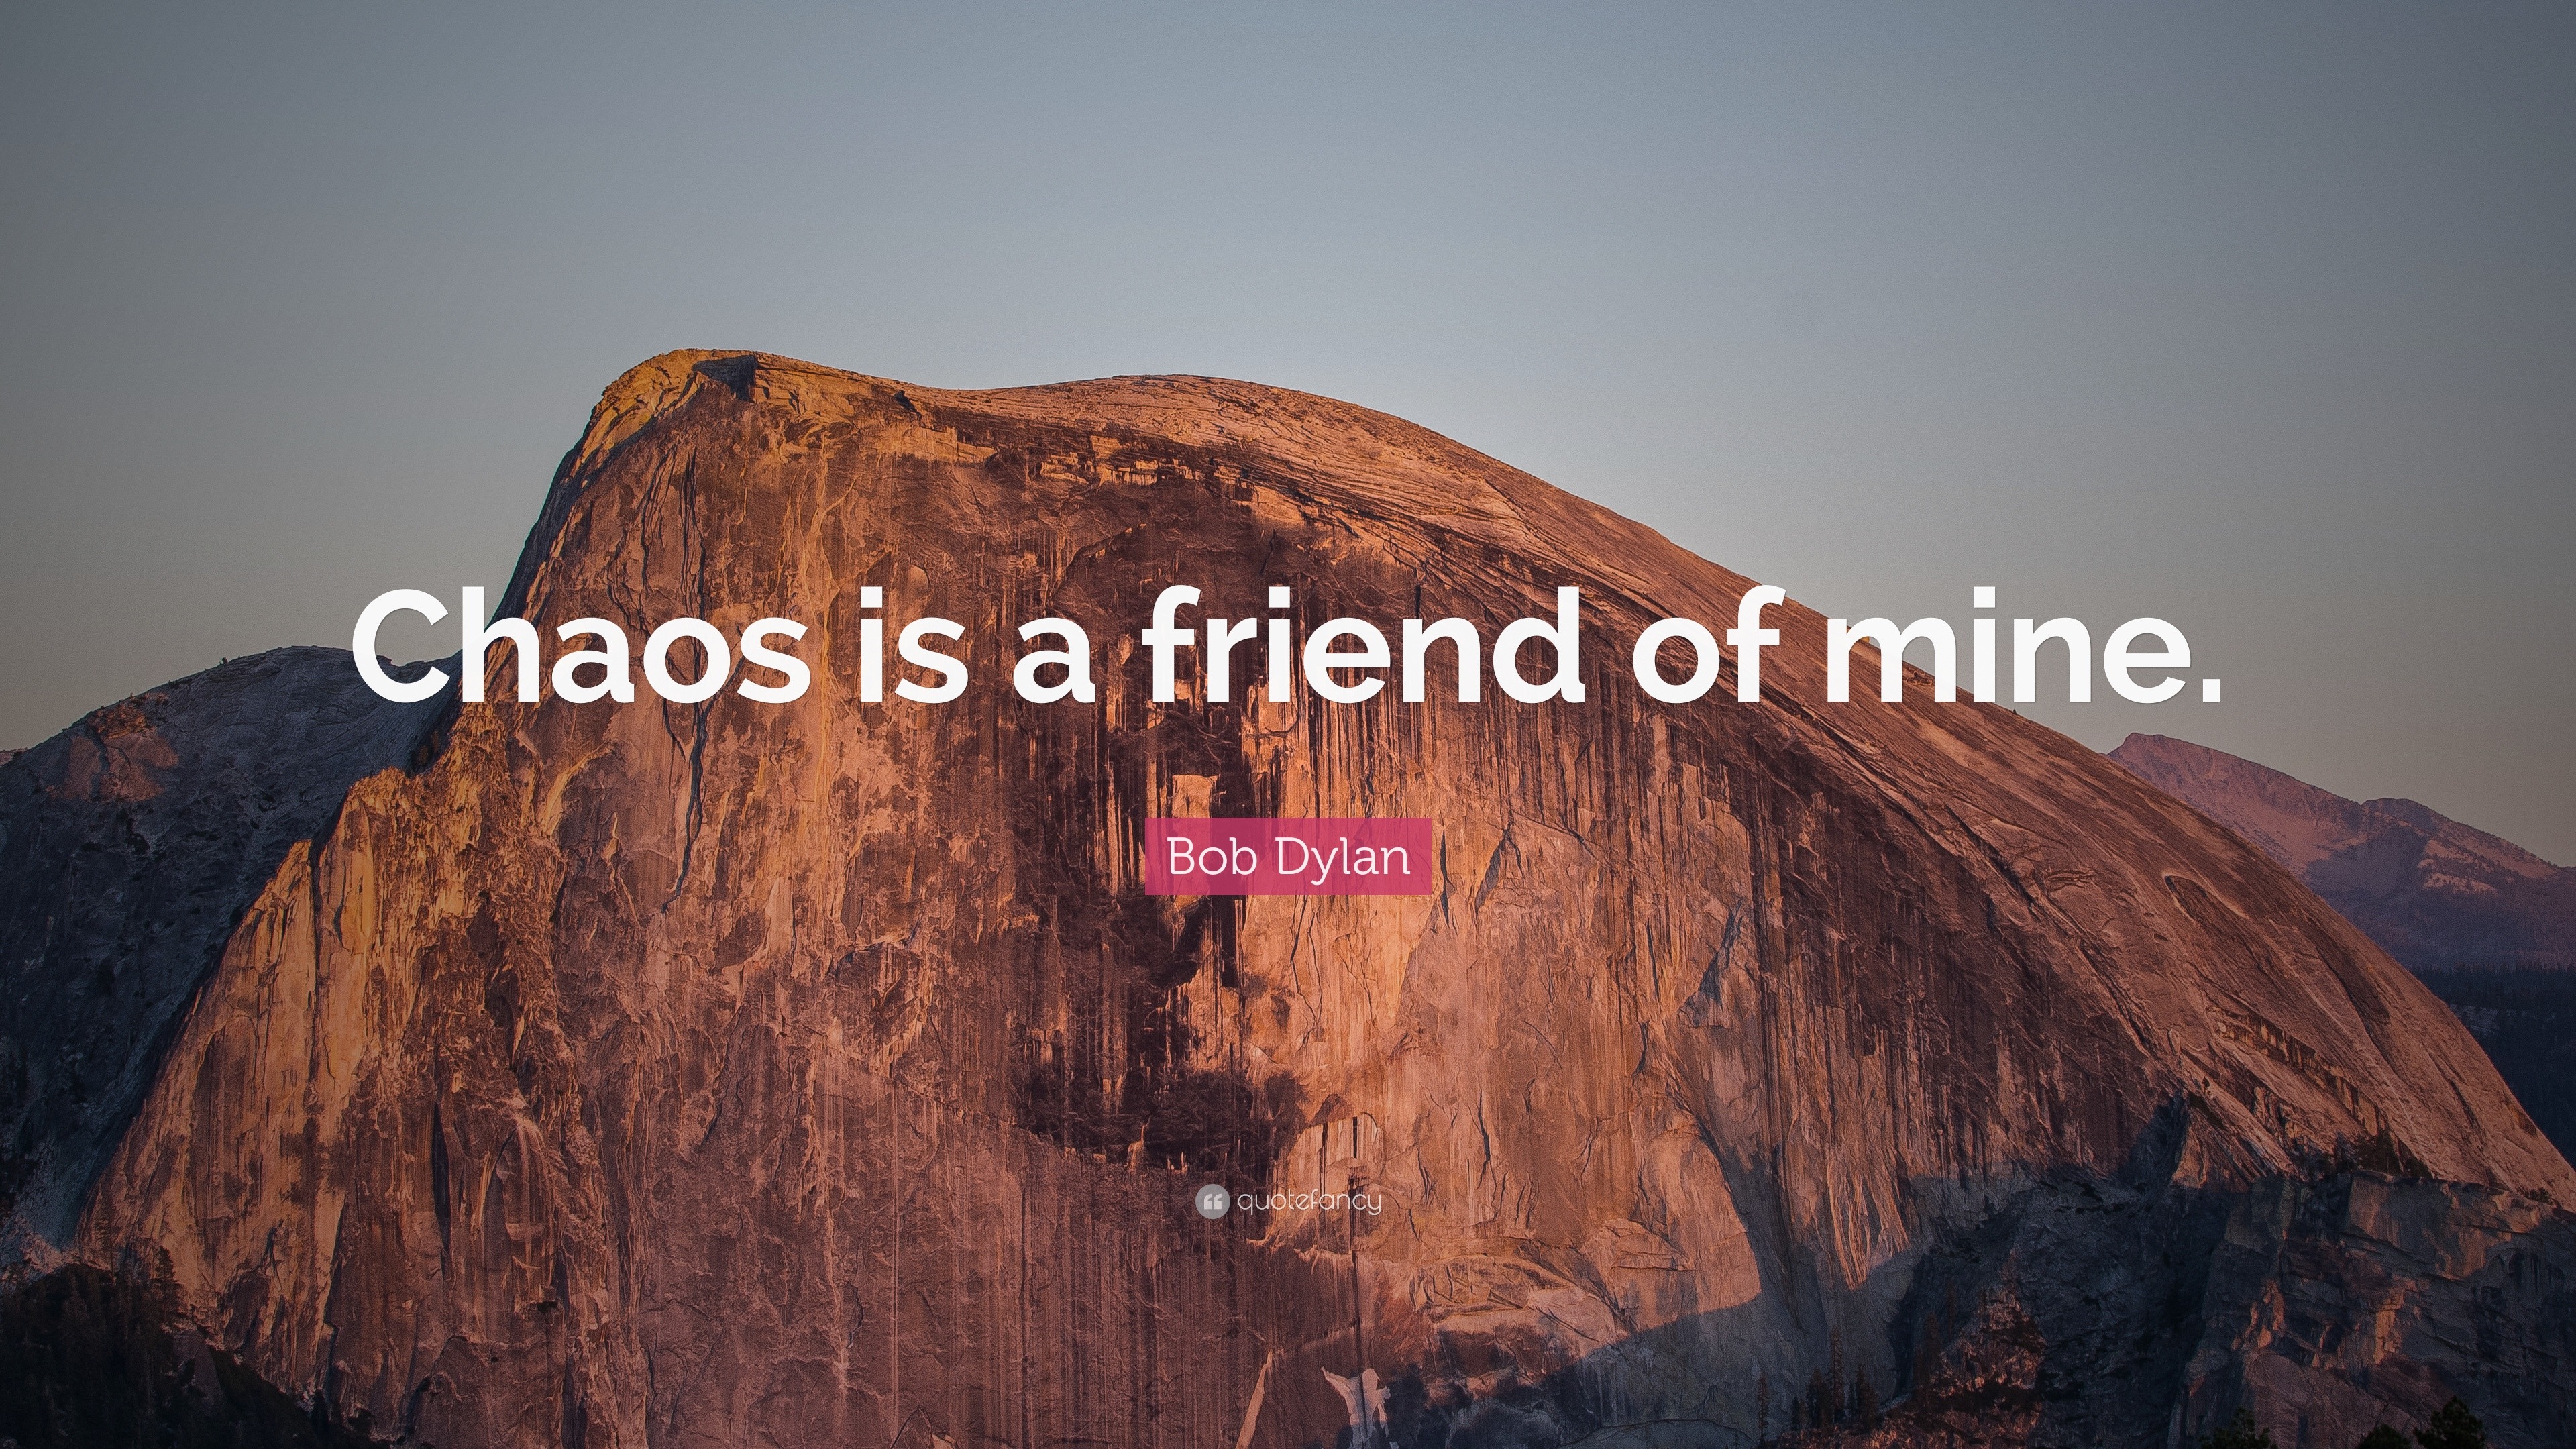 Bob Dylan Quote: "Chaos is a friend of mine." (10 ...